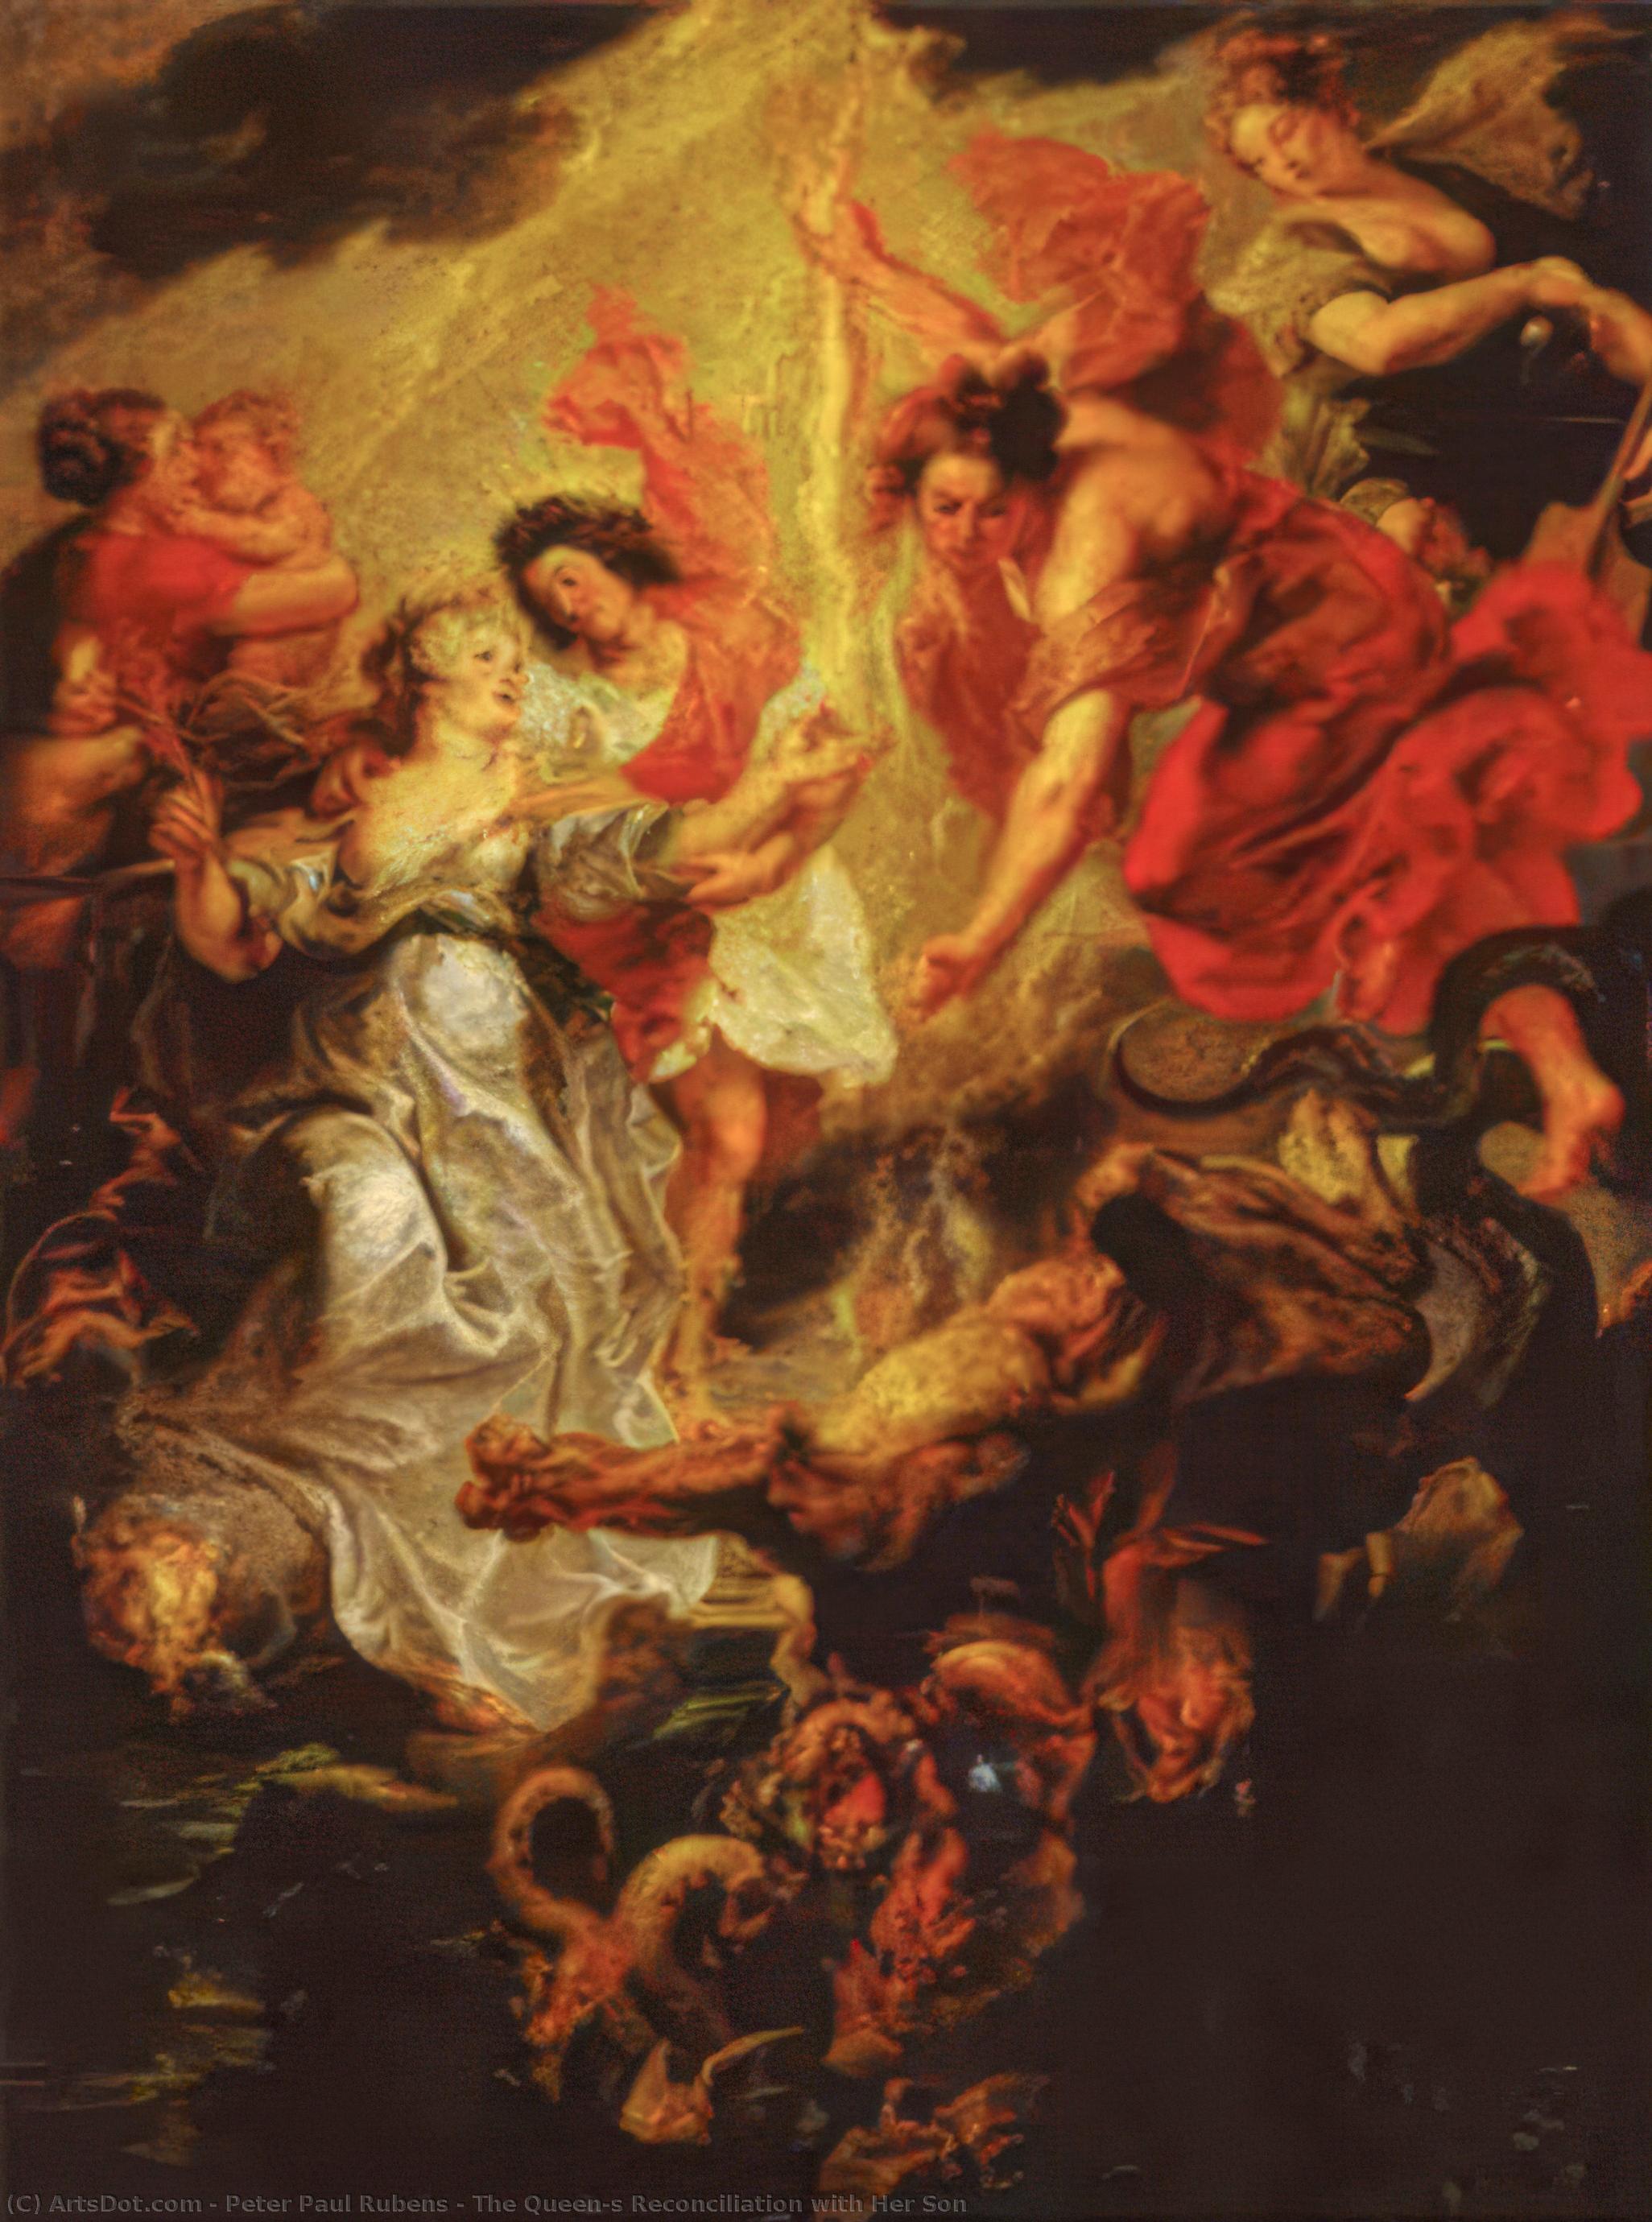 WikiOO.org - Encyclopedia of Fine Arts - Malba, Artwork Peter Paul Rubens - The Queen's Reconciliation with Her Son